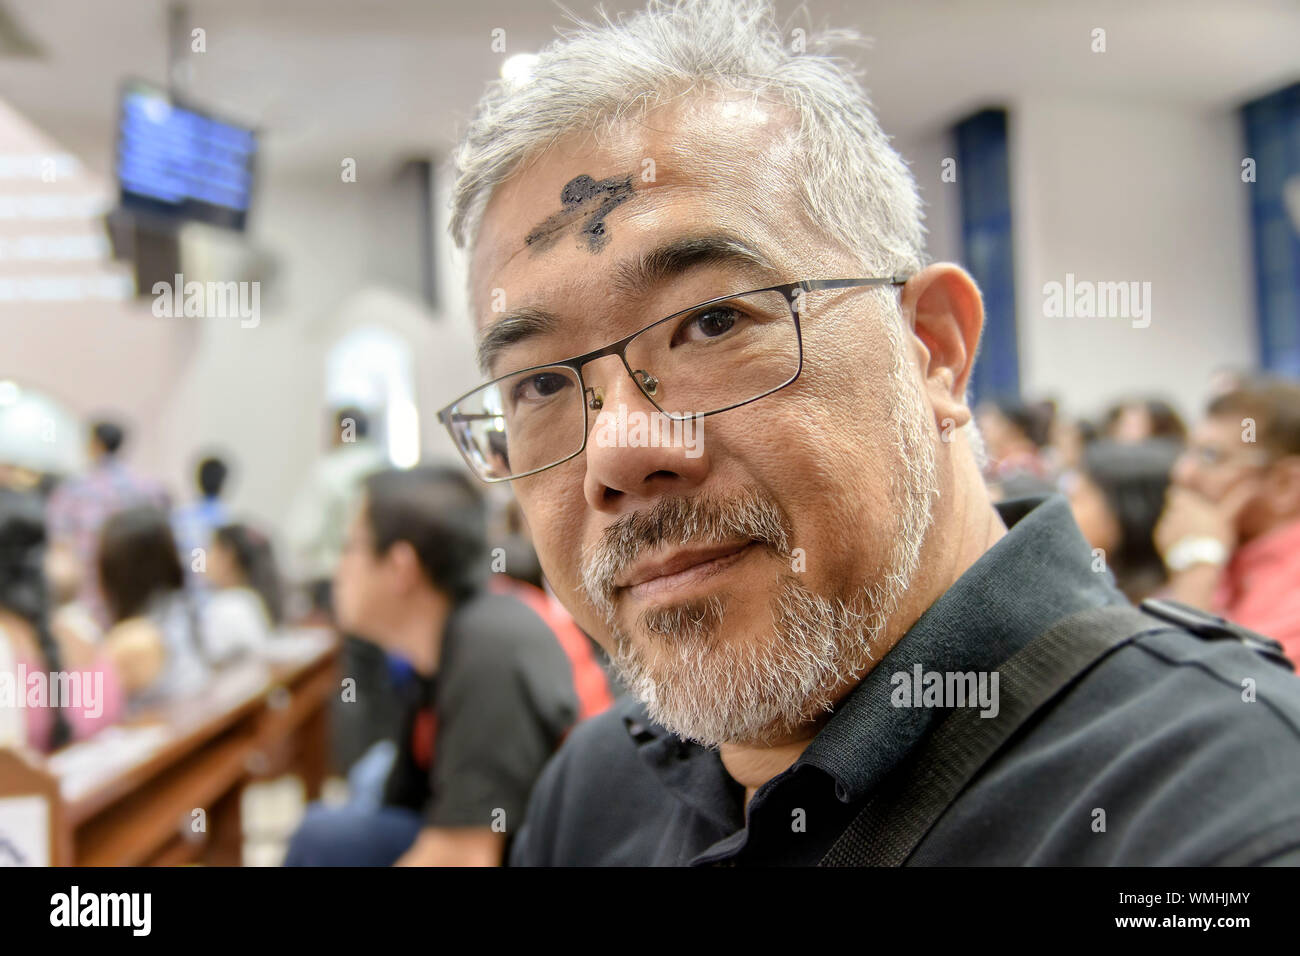 Close-up Portrait Of Mature Man With Ash On Forehead At Church Stock Photo